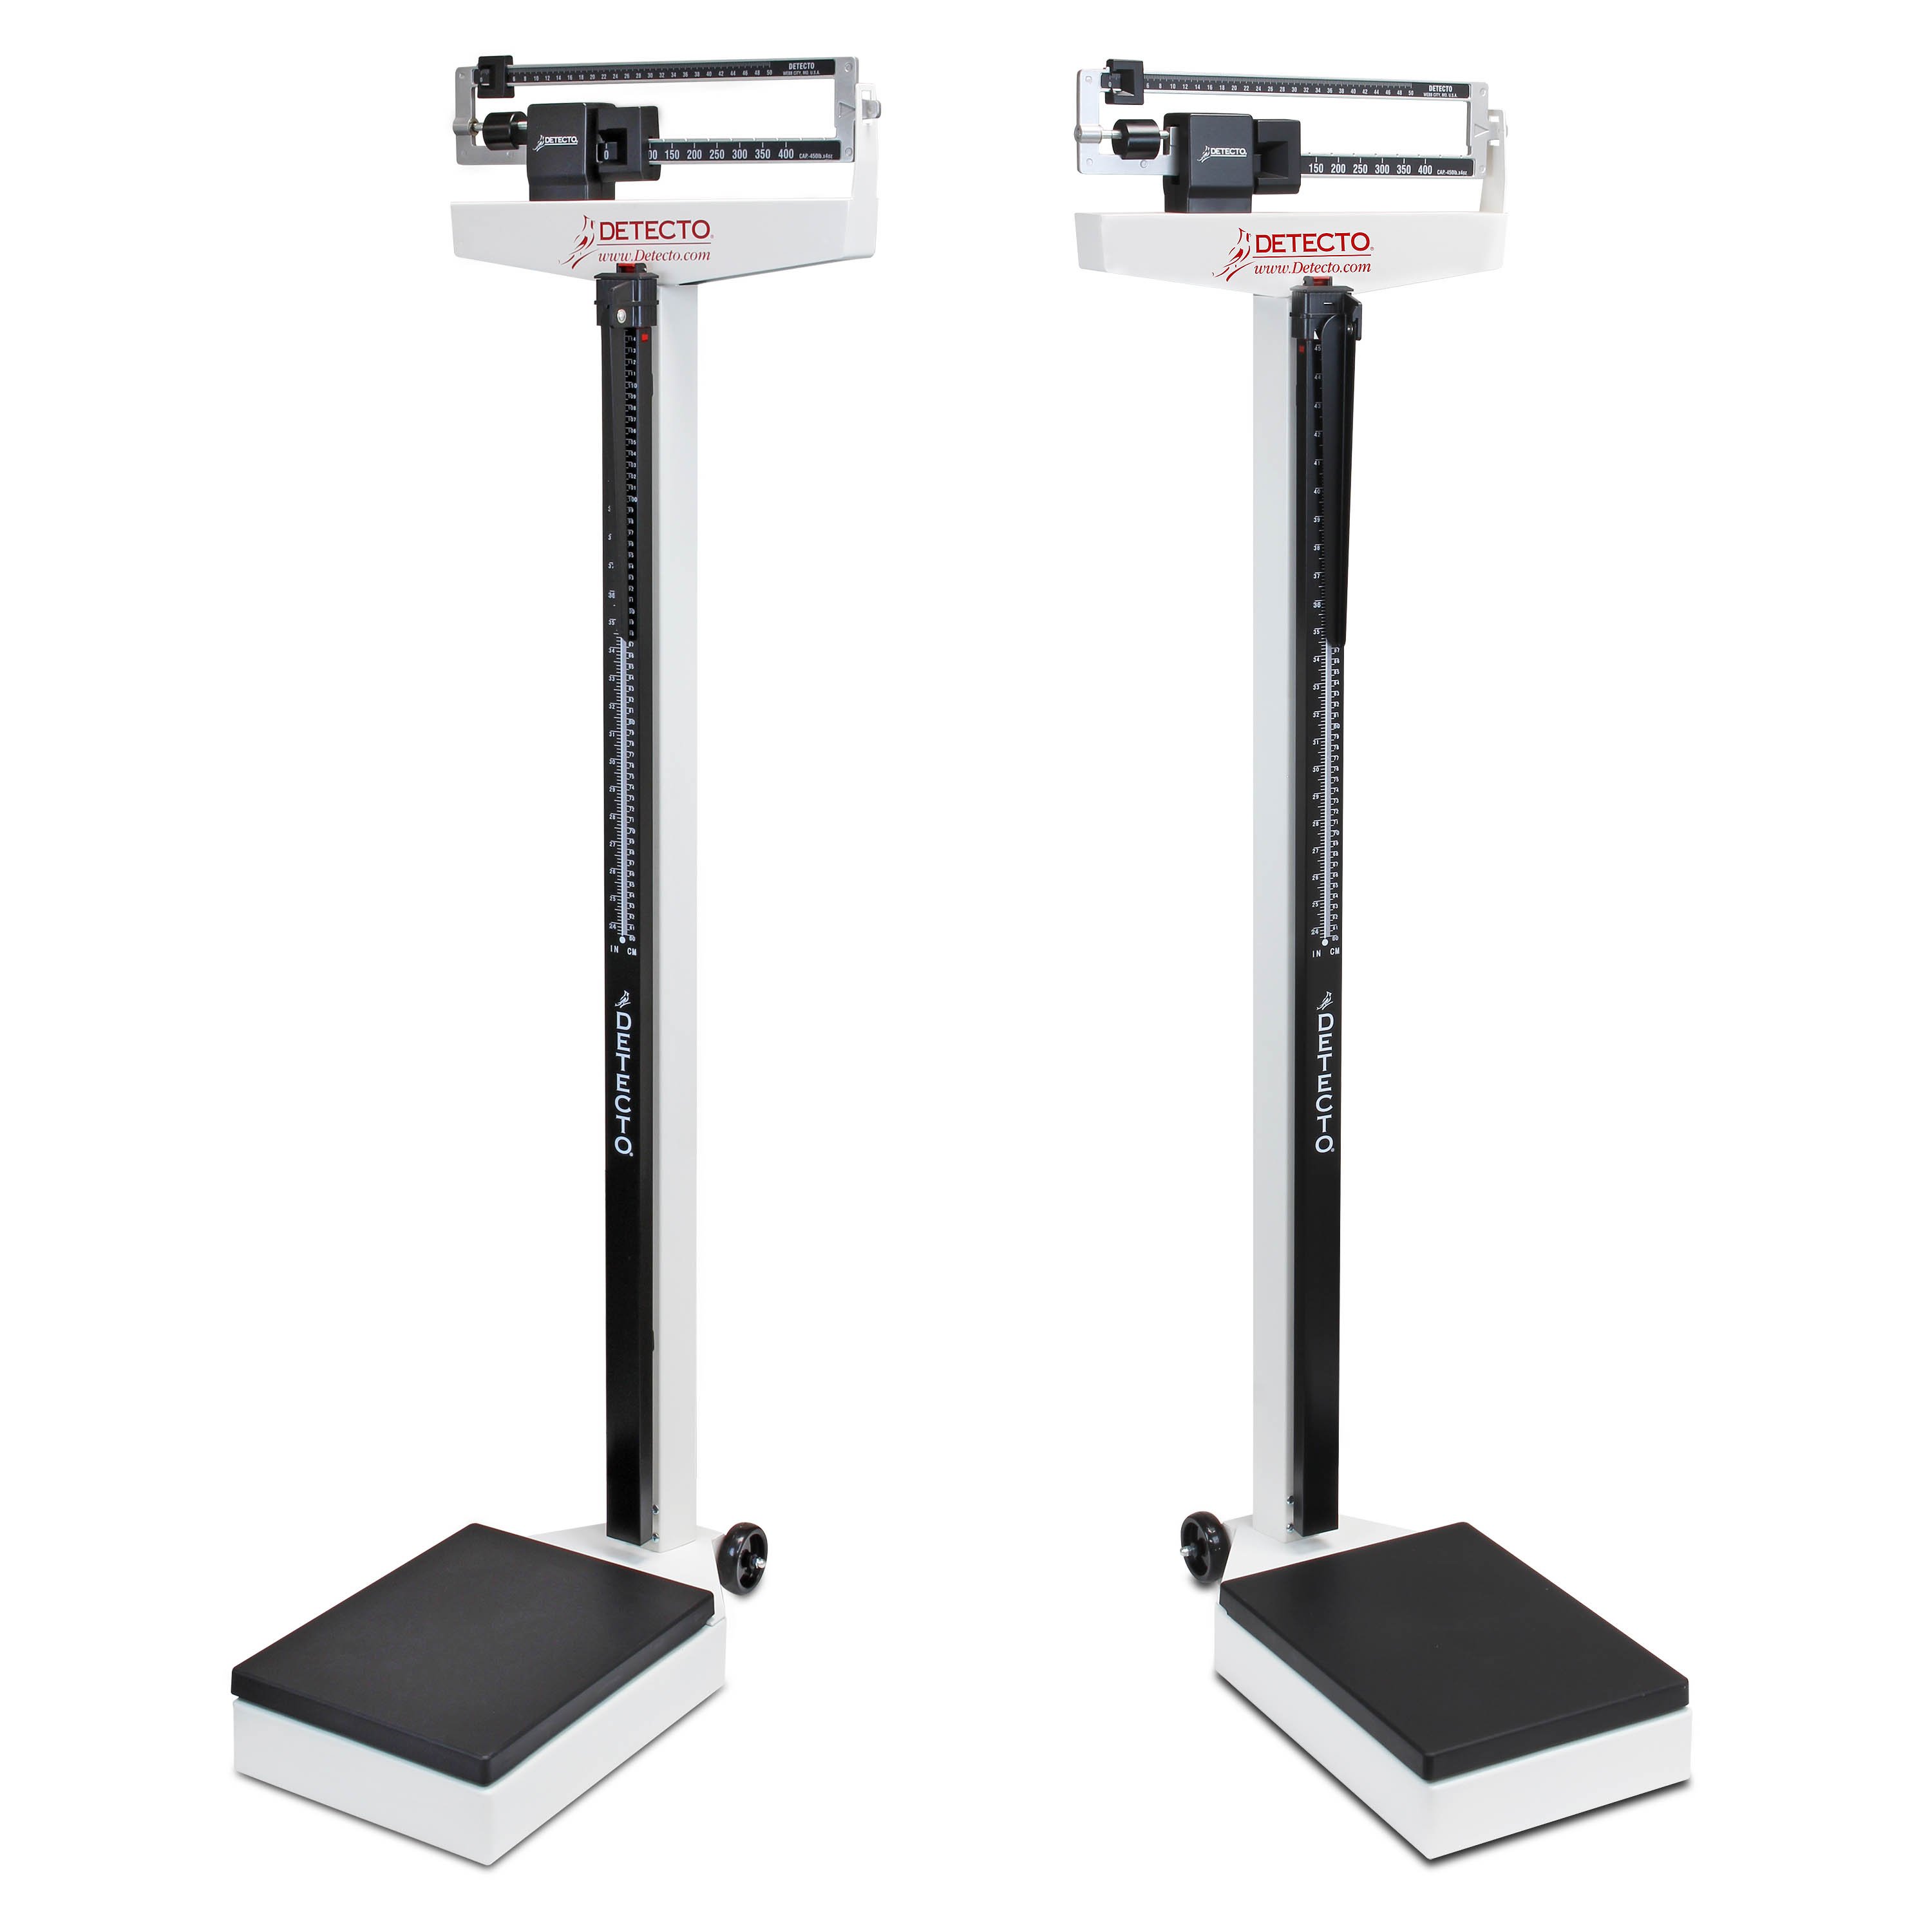 detecto_439_eye-level_physician_scales_height_rod_balance_beam